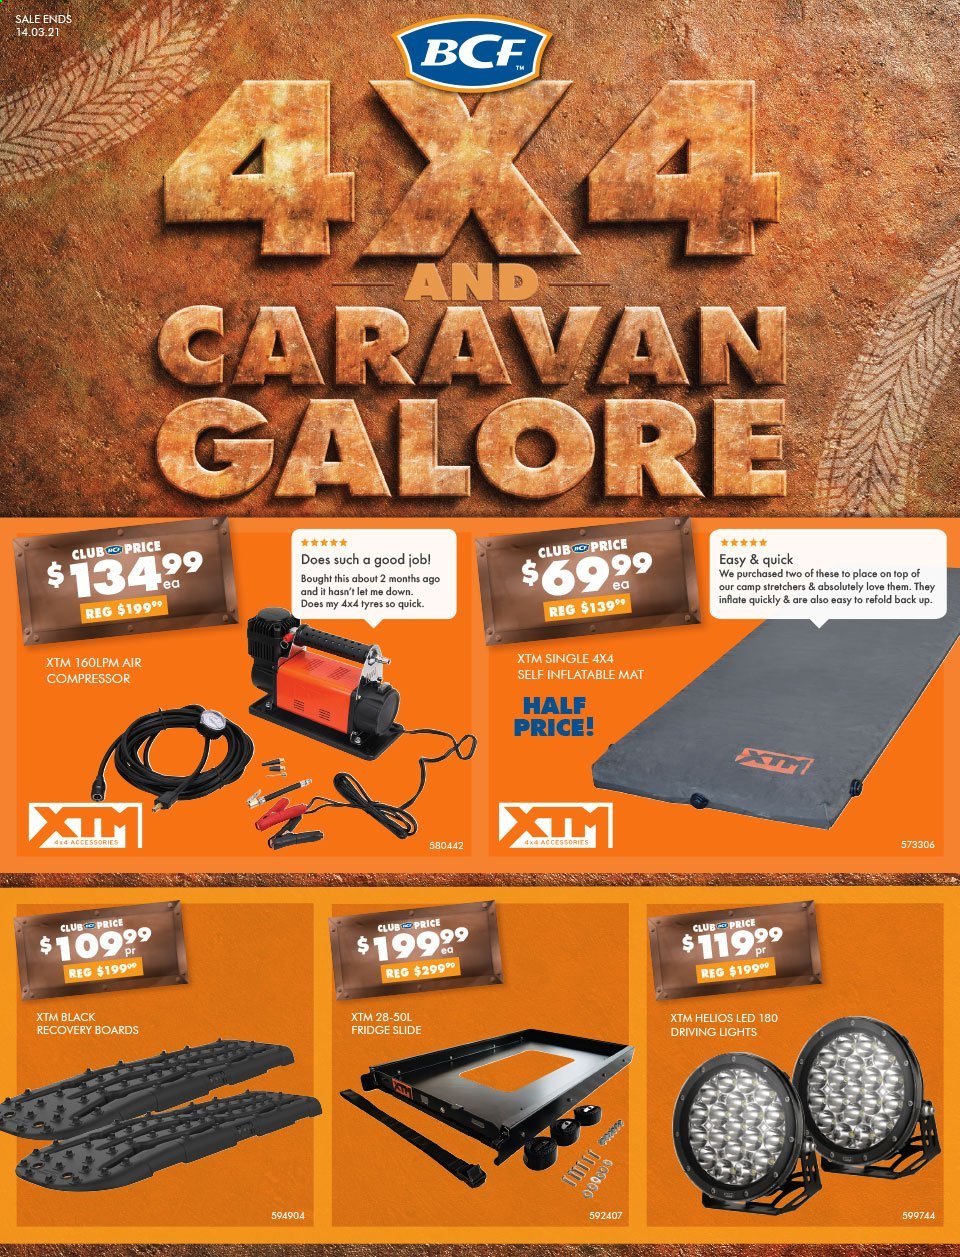 thumbnail - BCF Catalogue - 24 Feb 2021 - 14 Mar 2021 - Sales products - refrigerator, fridge, XTM, recovery boards, car battery, driving lights, air compressor, tires, self inflatable mat, fridge slide. Page 1.